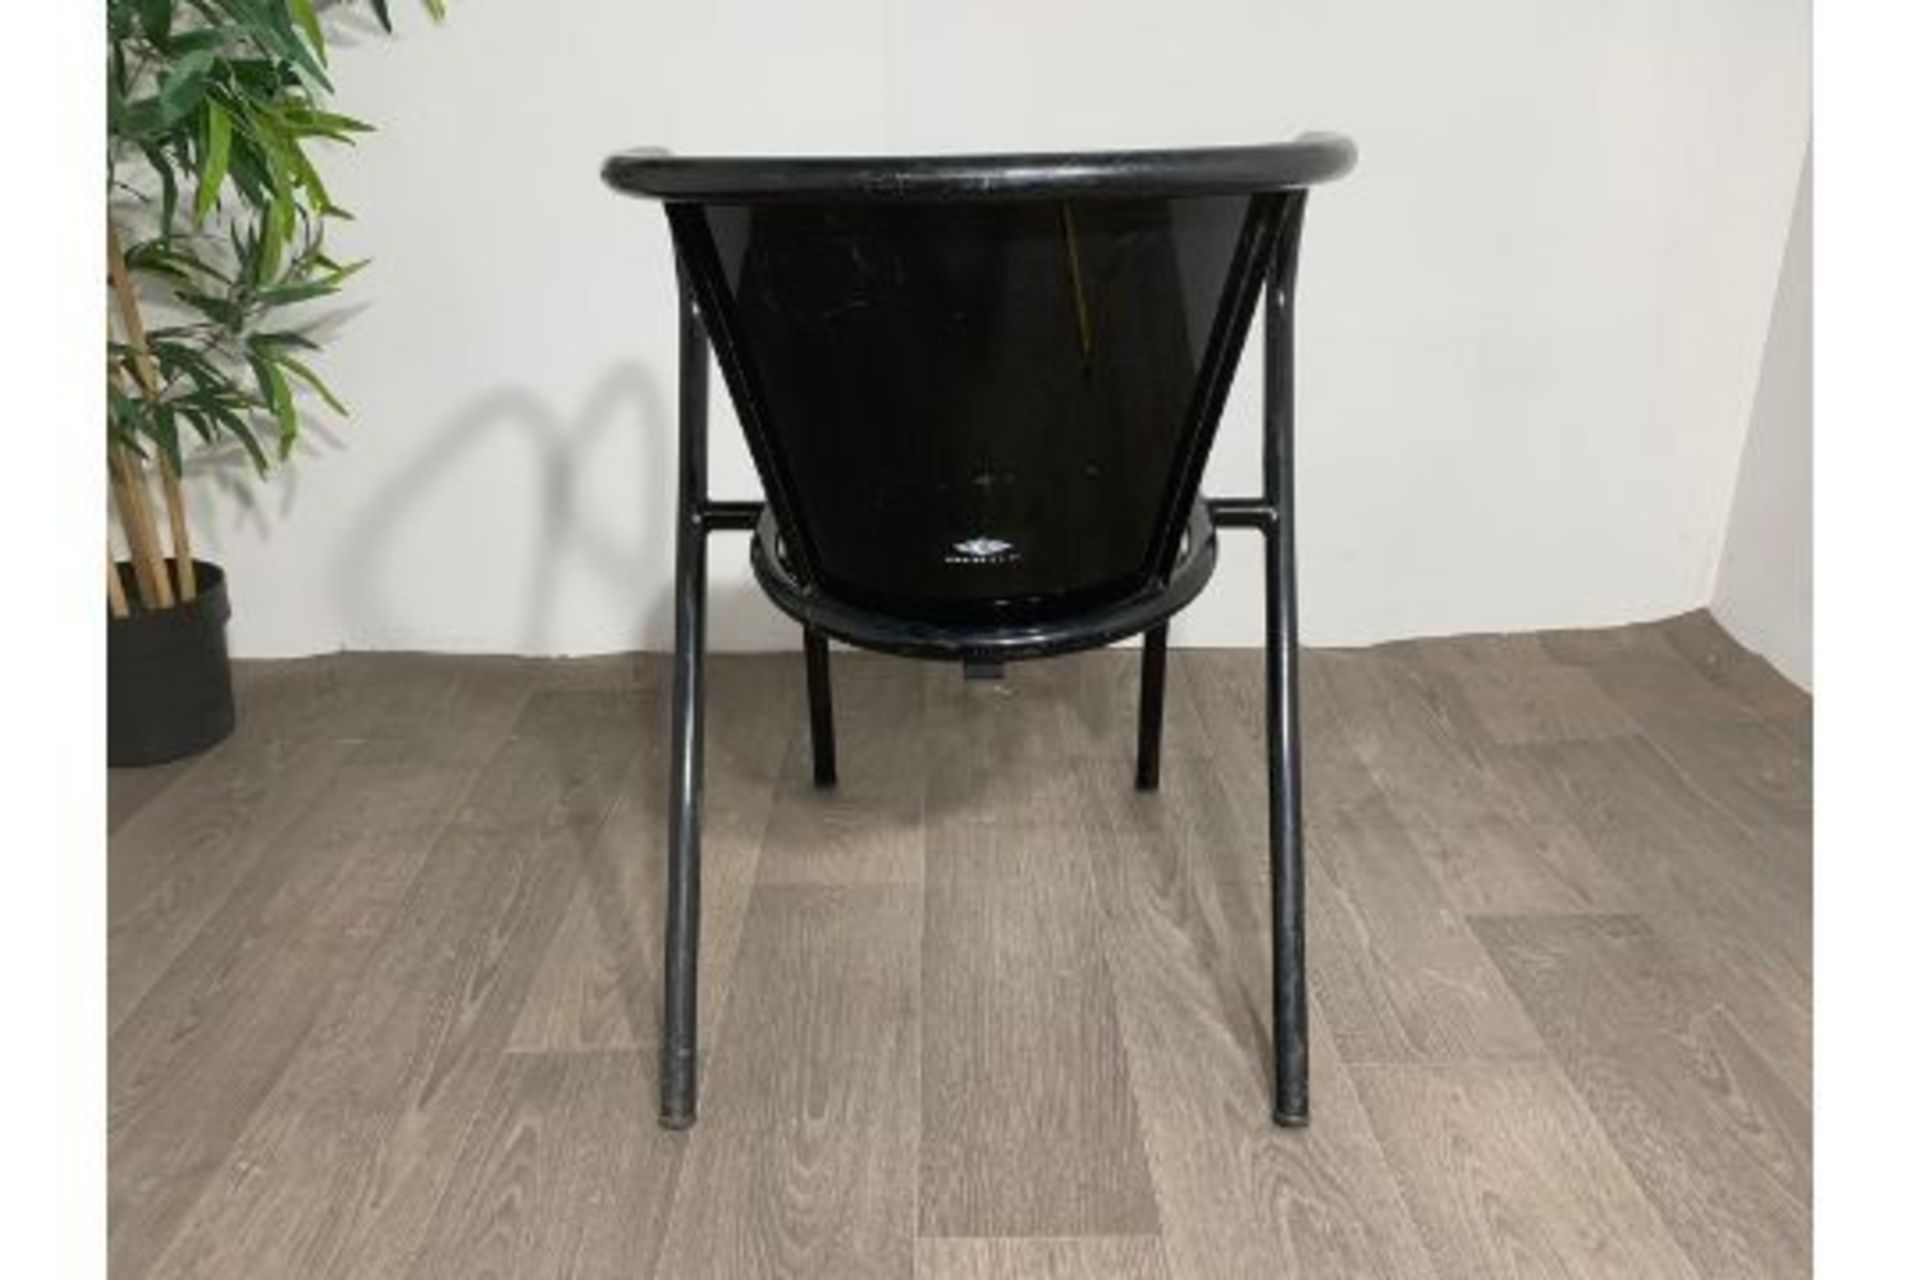 Adico 5008 Black Chair With Wooden Seat x4 - Image 3 of 4